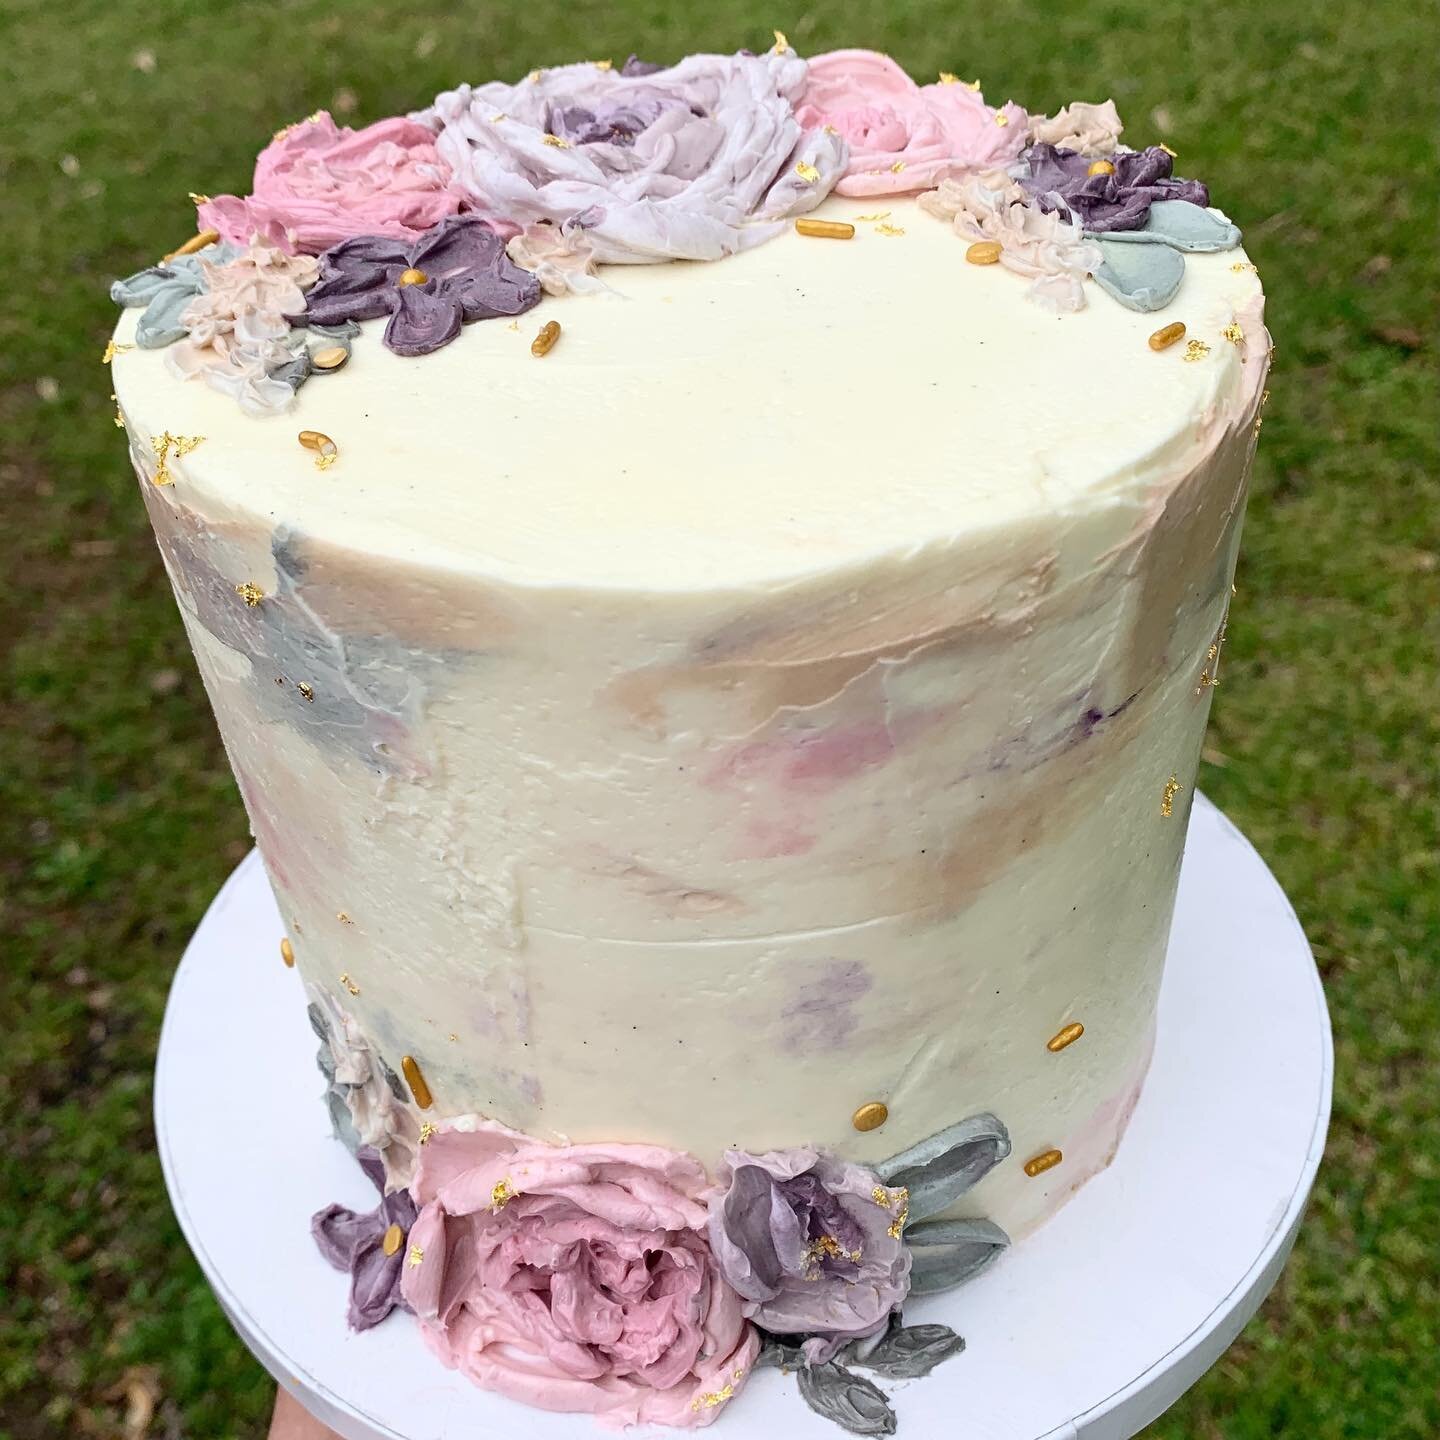 This cake reminds me of a vintage teacup. Sweet and classy and it&rsquo;s super yummy! 

Have I ever mentioned how much I love Swiss meringue buttercream? It&rsquo;s just smooth and light, and never too sweet. It also is very fun to decorate with. 🌺